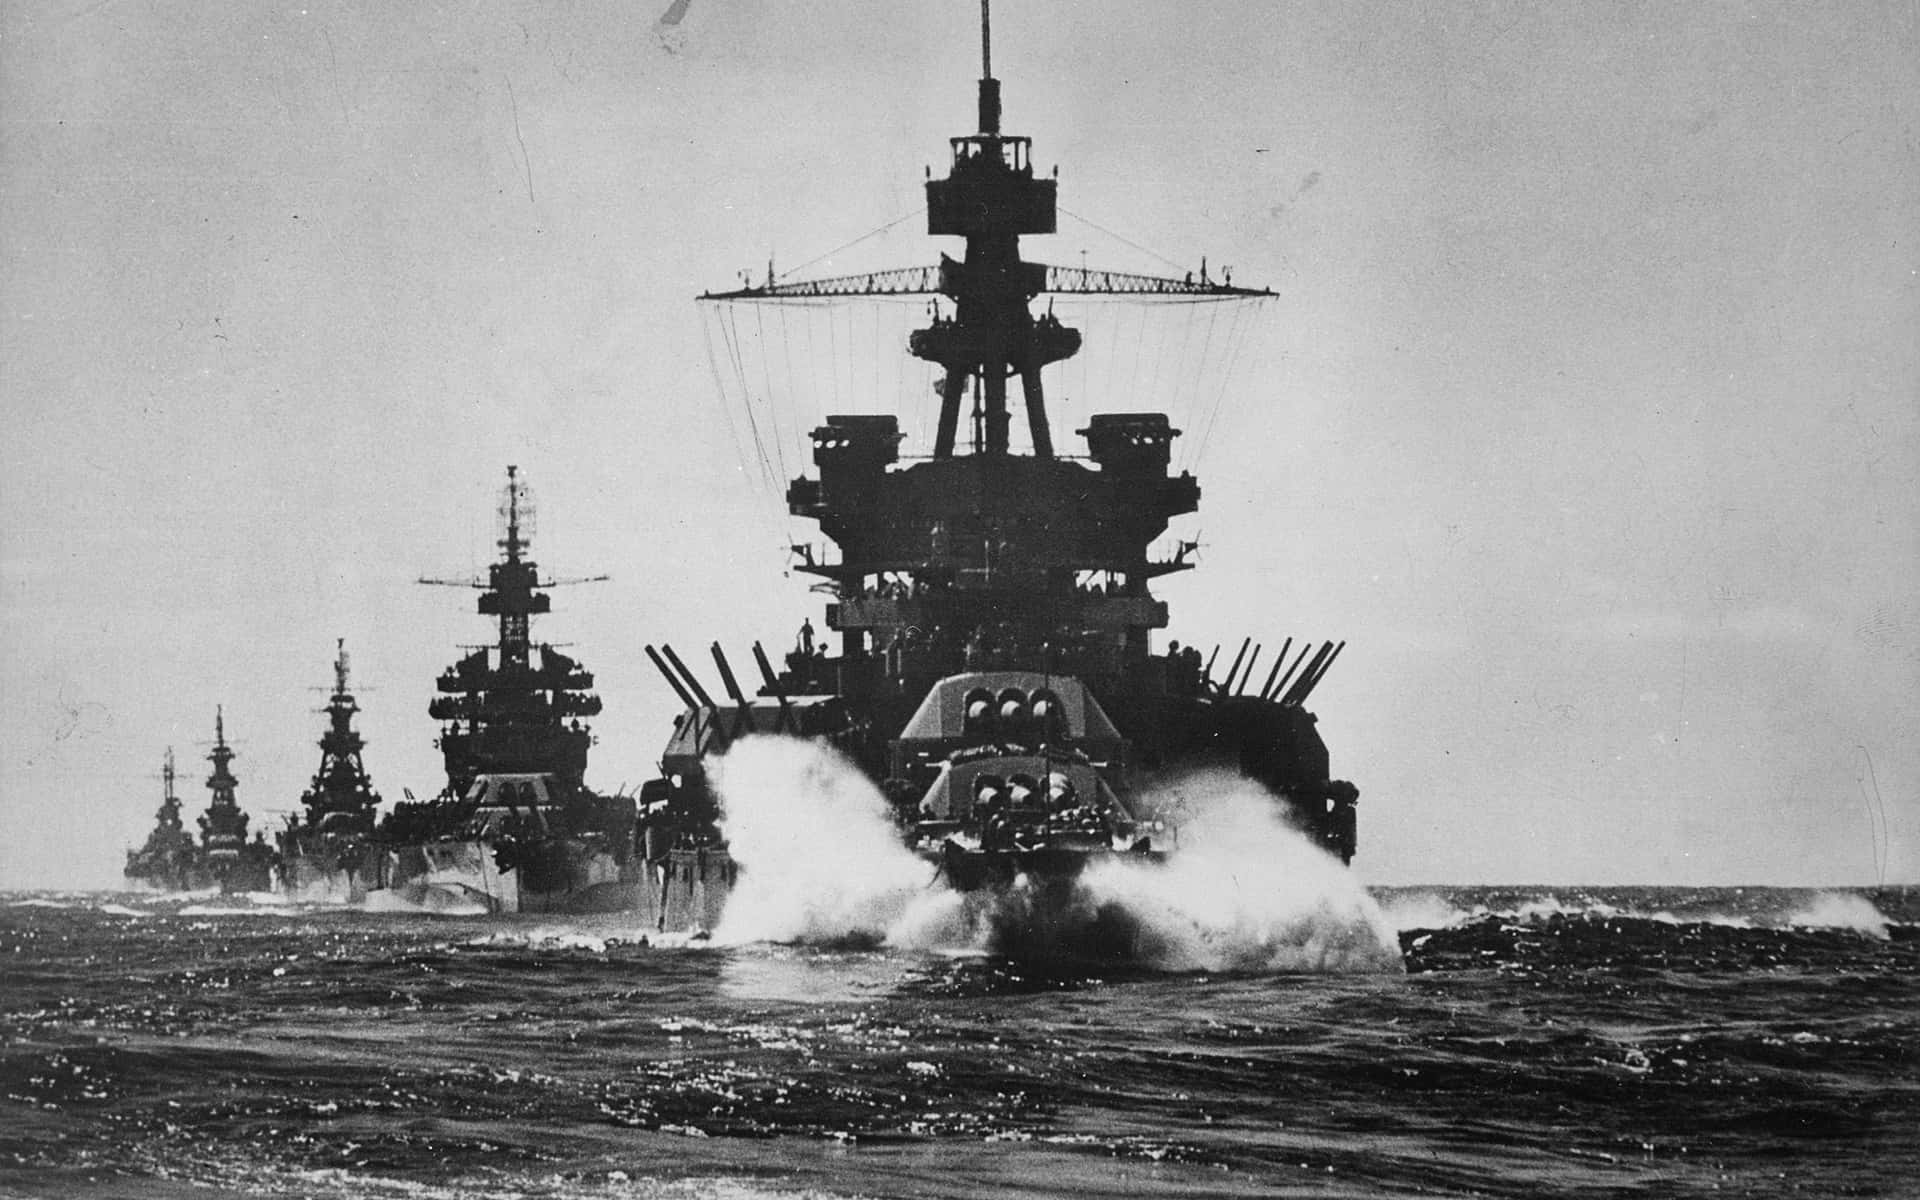 A Group Of Battleships In The Ocean